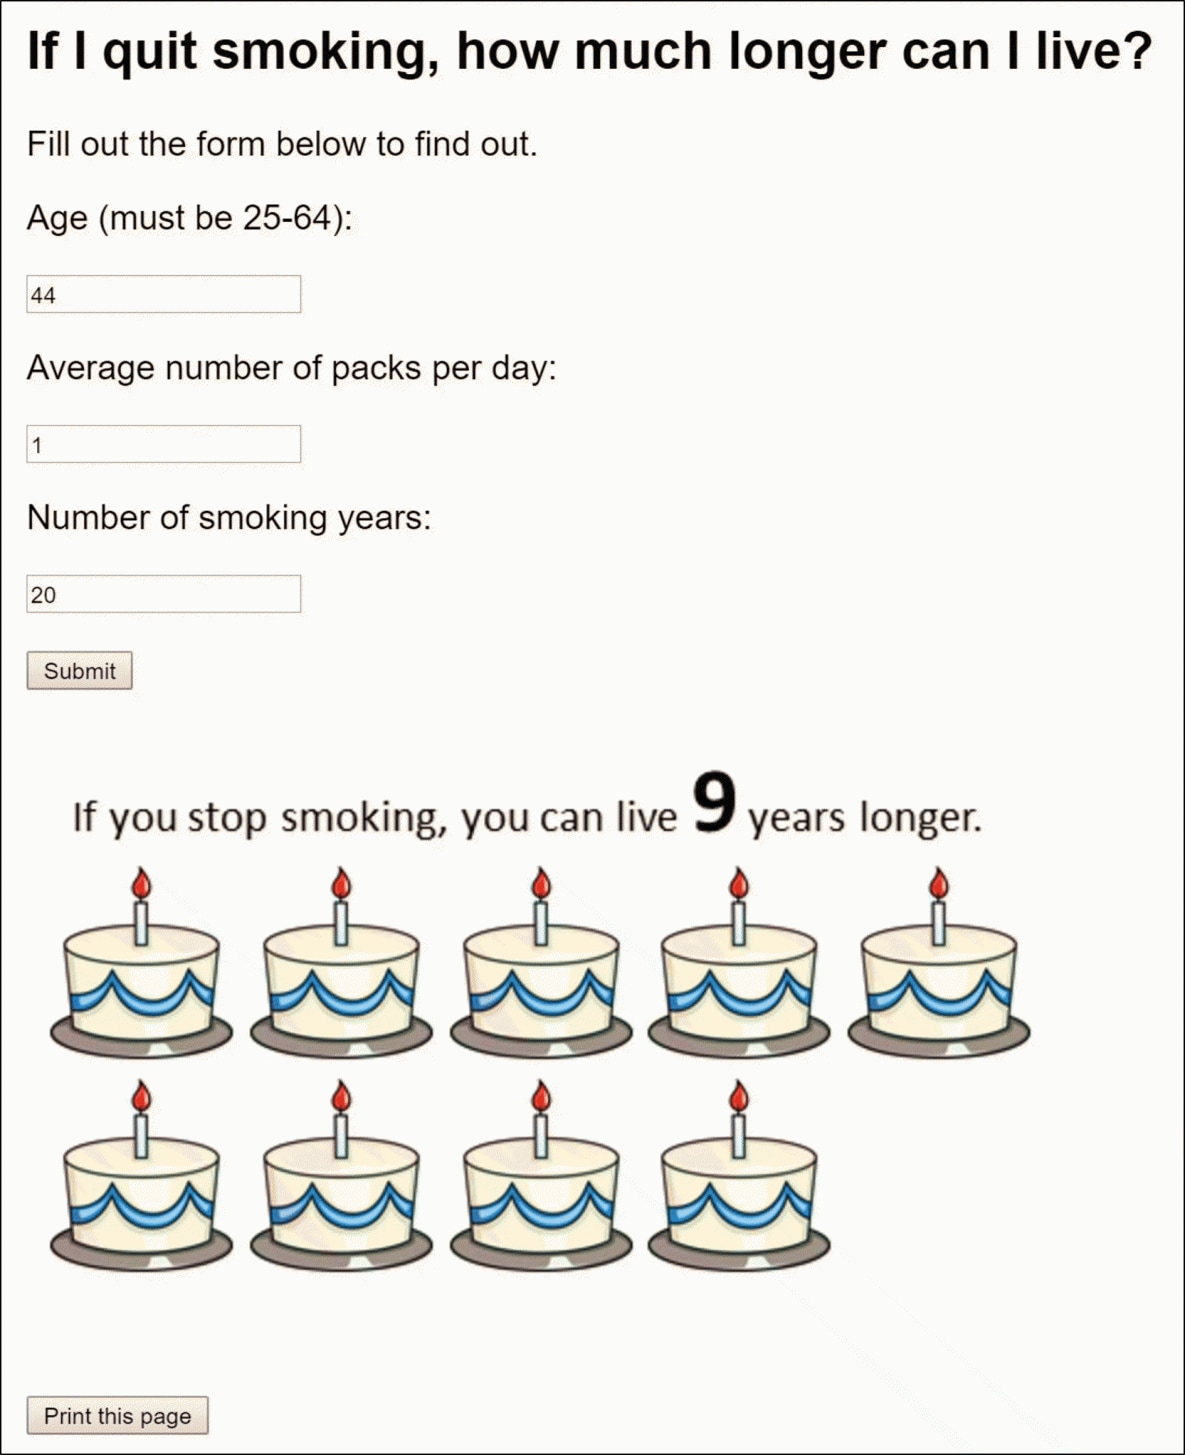 Screenshot of a web-based decision aid that highlights the benefits of smoking cessation. Medical students used the decision aid to engage with patients in a conversation about smoking cessation using motivational interviewing techniques.